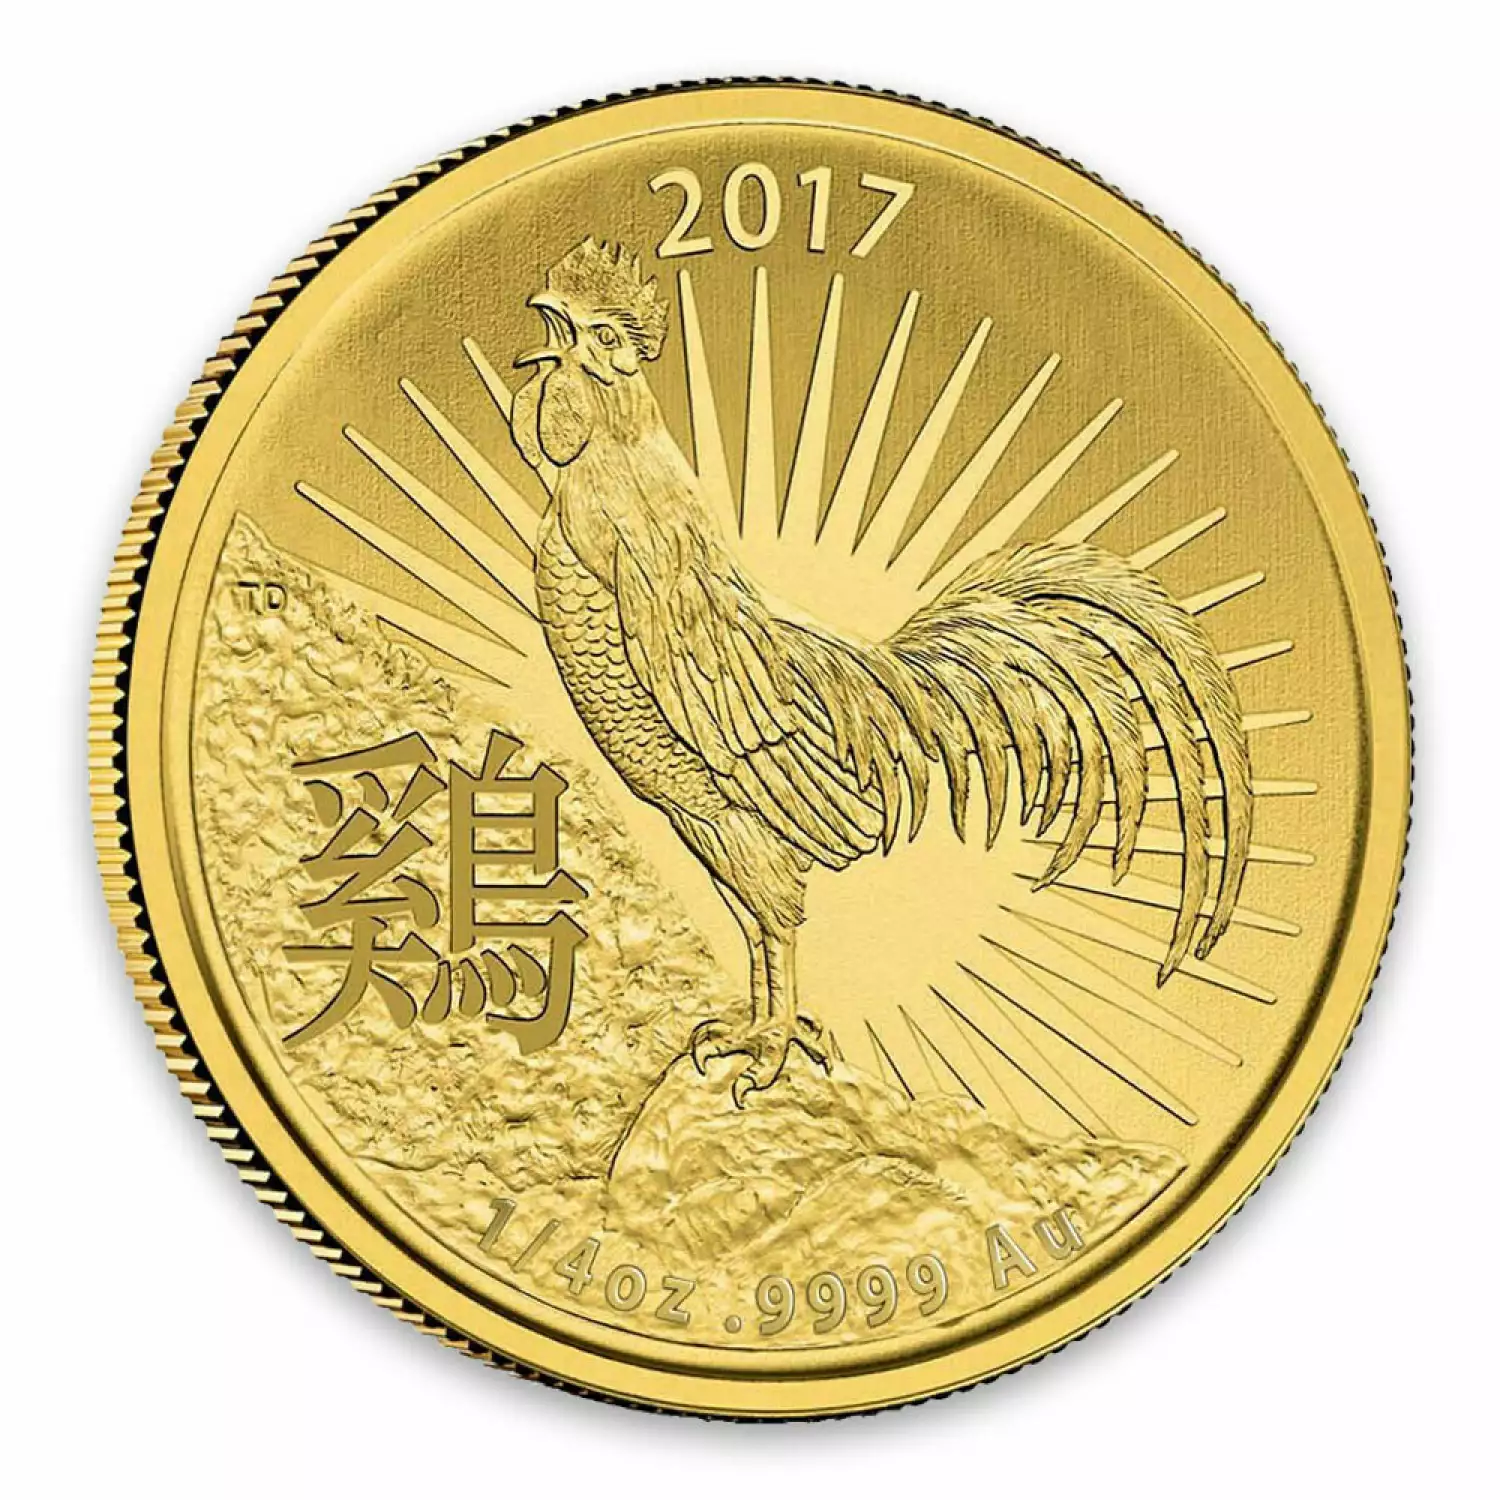 2017 Royal Australian Mint 1/4oz Year of the Rooster (2)